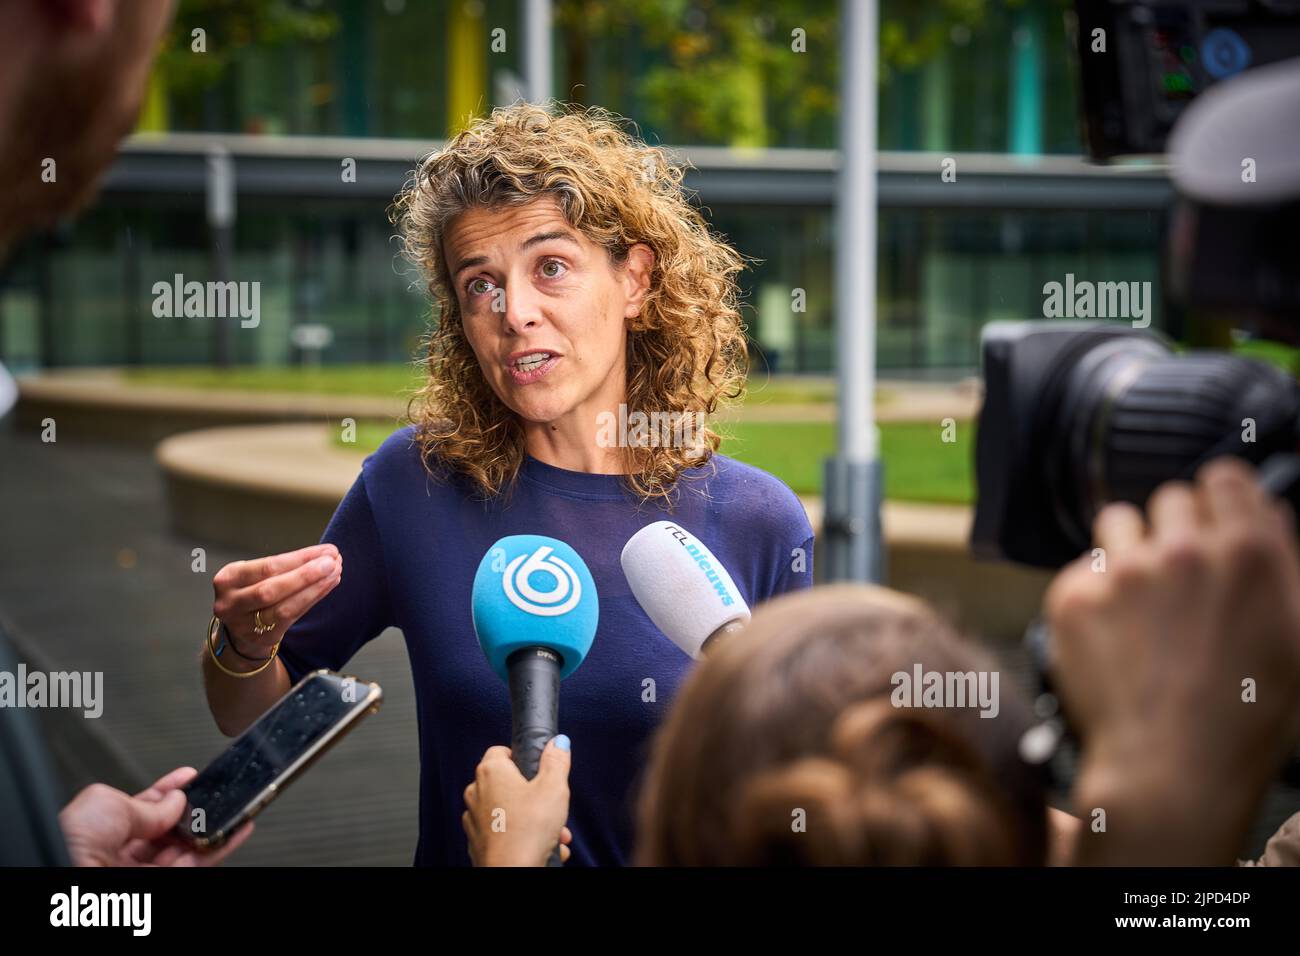 2022-08-17 13:31:02 THE HAGUE - VVD Party leader Sophie Hermans arrives at the Ministry of Finance for consultations about the budget. ANP PHIL NIJHUIS netherlands out - belgium out Stock Photo